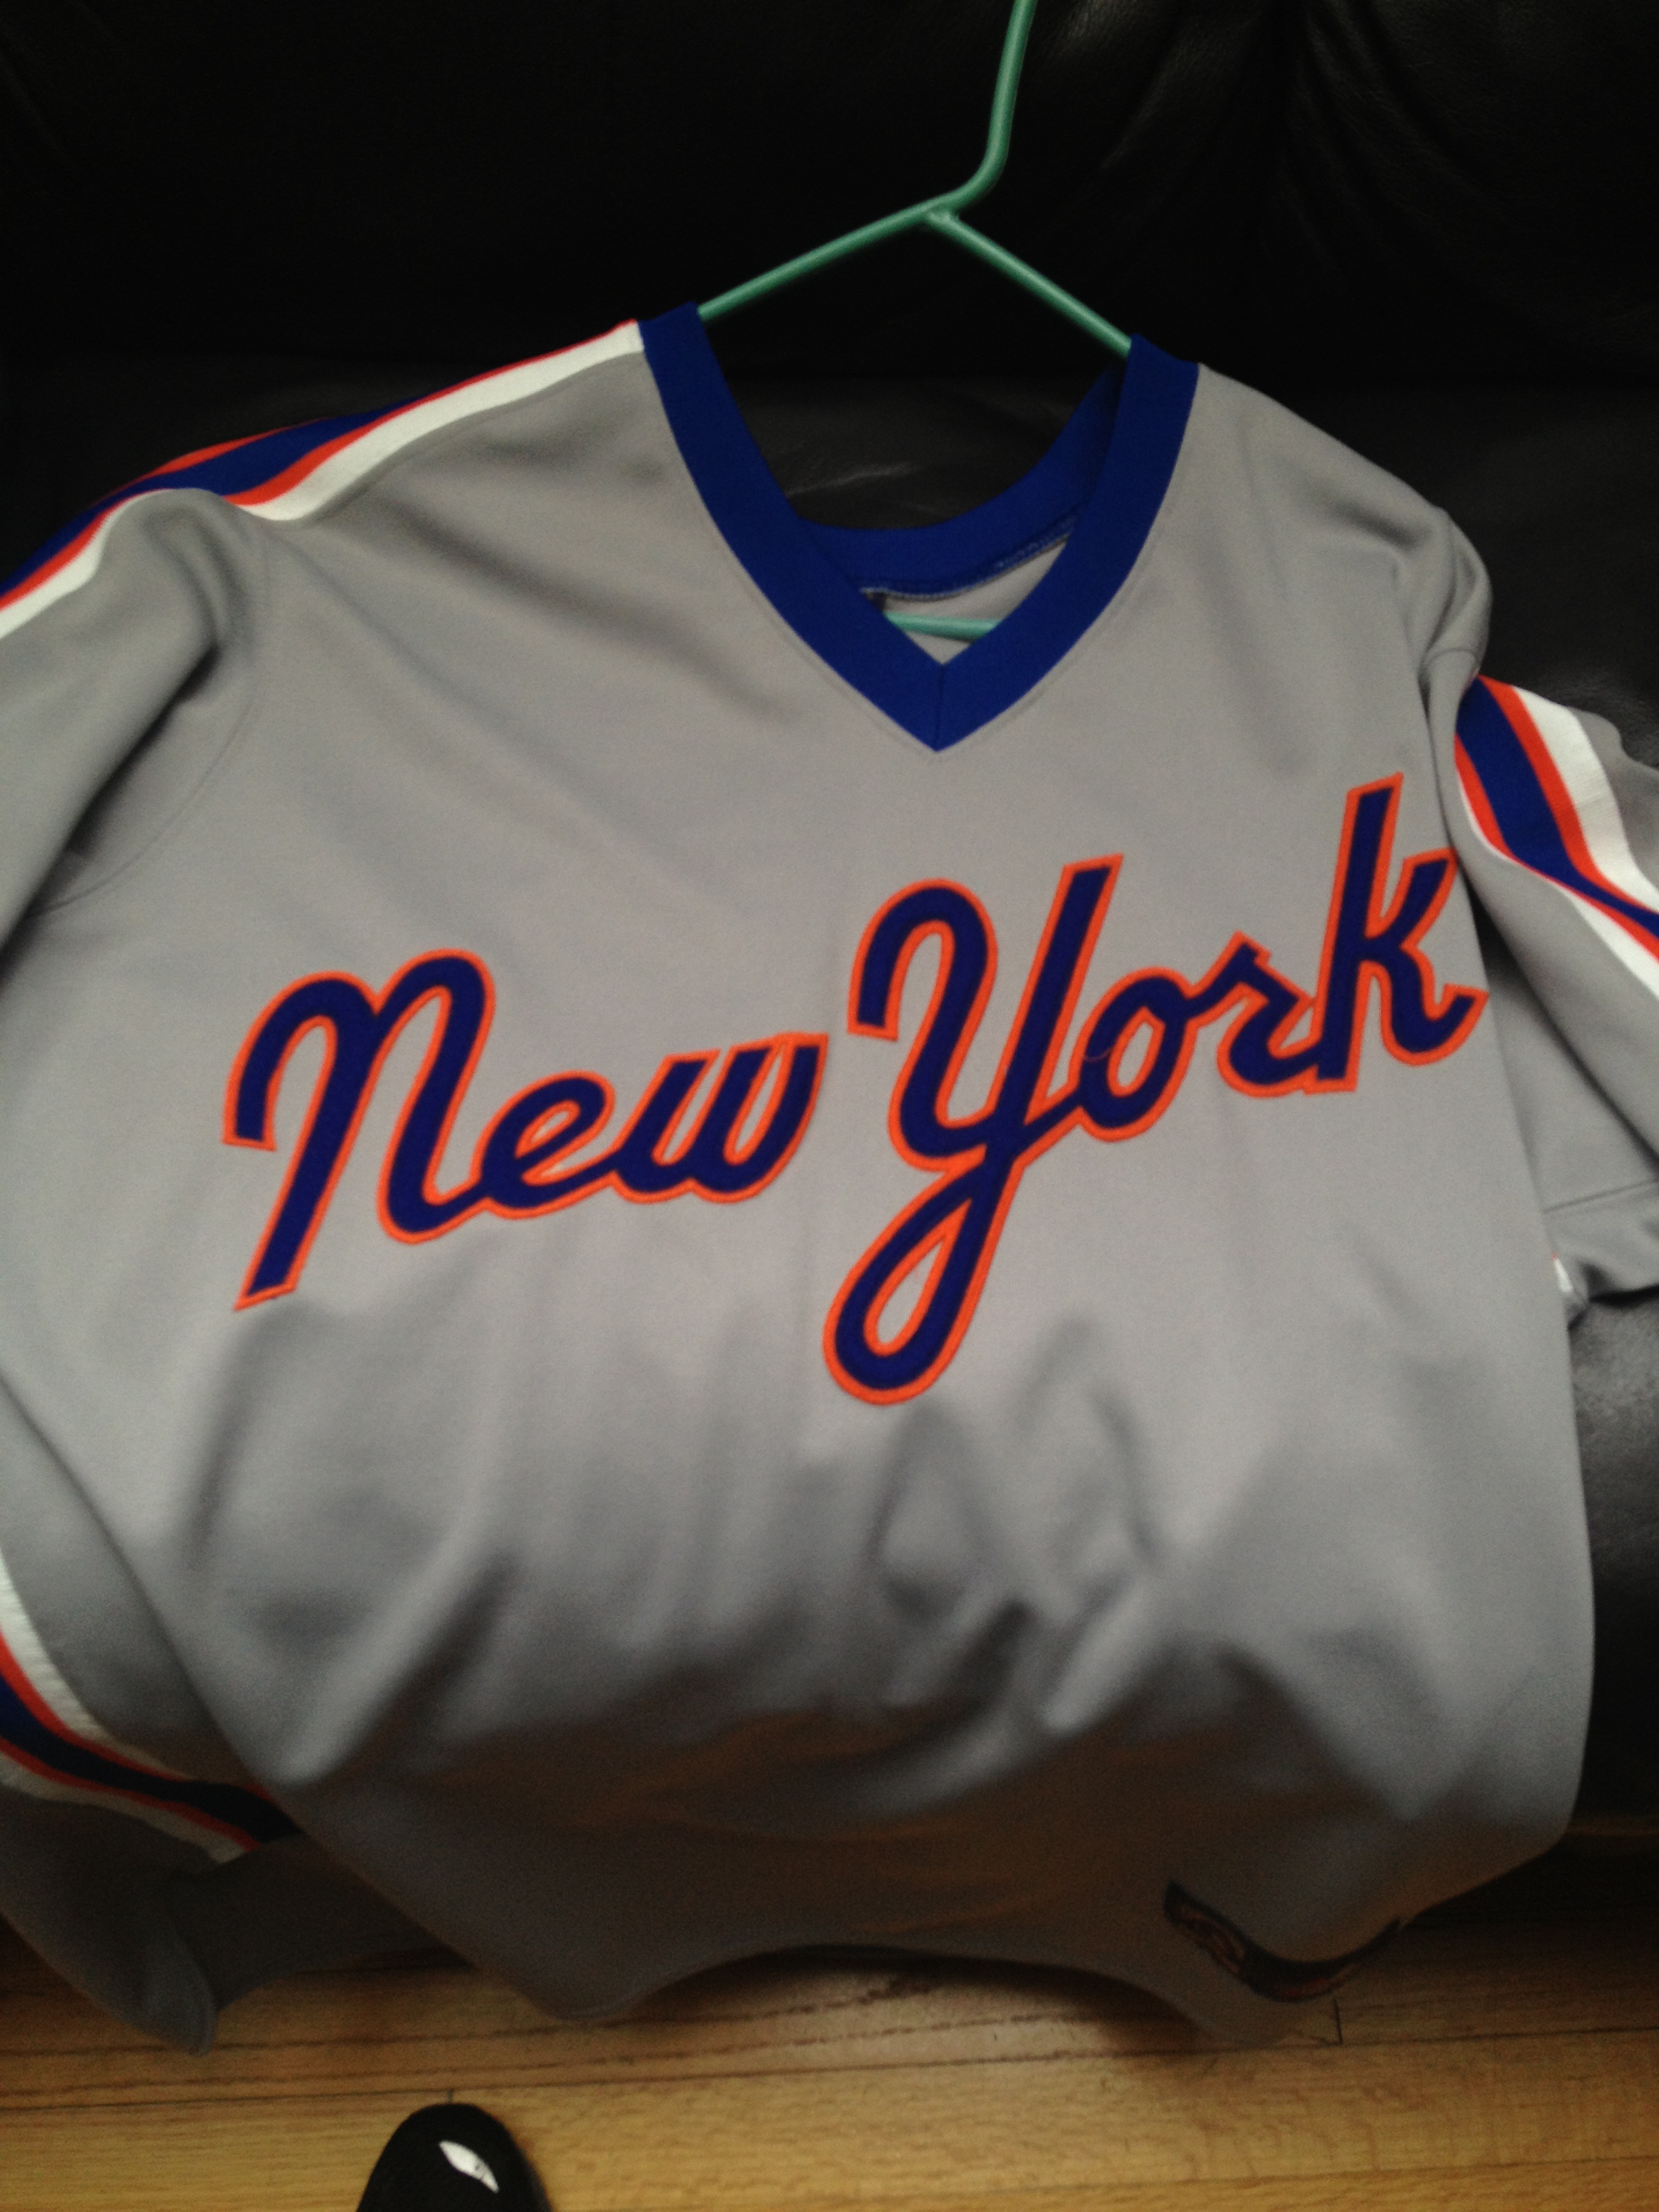 Shocking: 1987 Mets jersey booed at Queens Baseball Convention - The Mets  Police